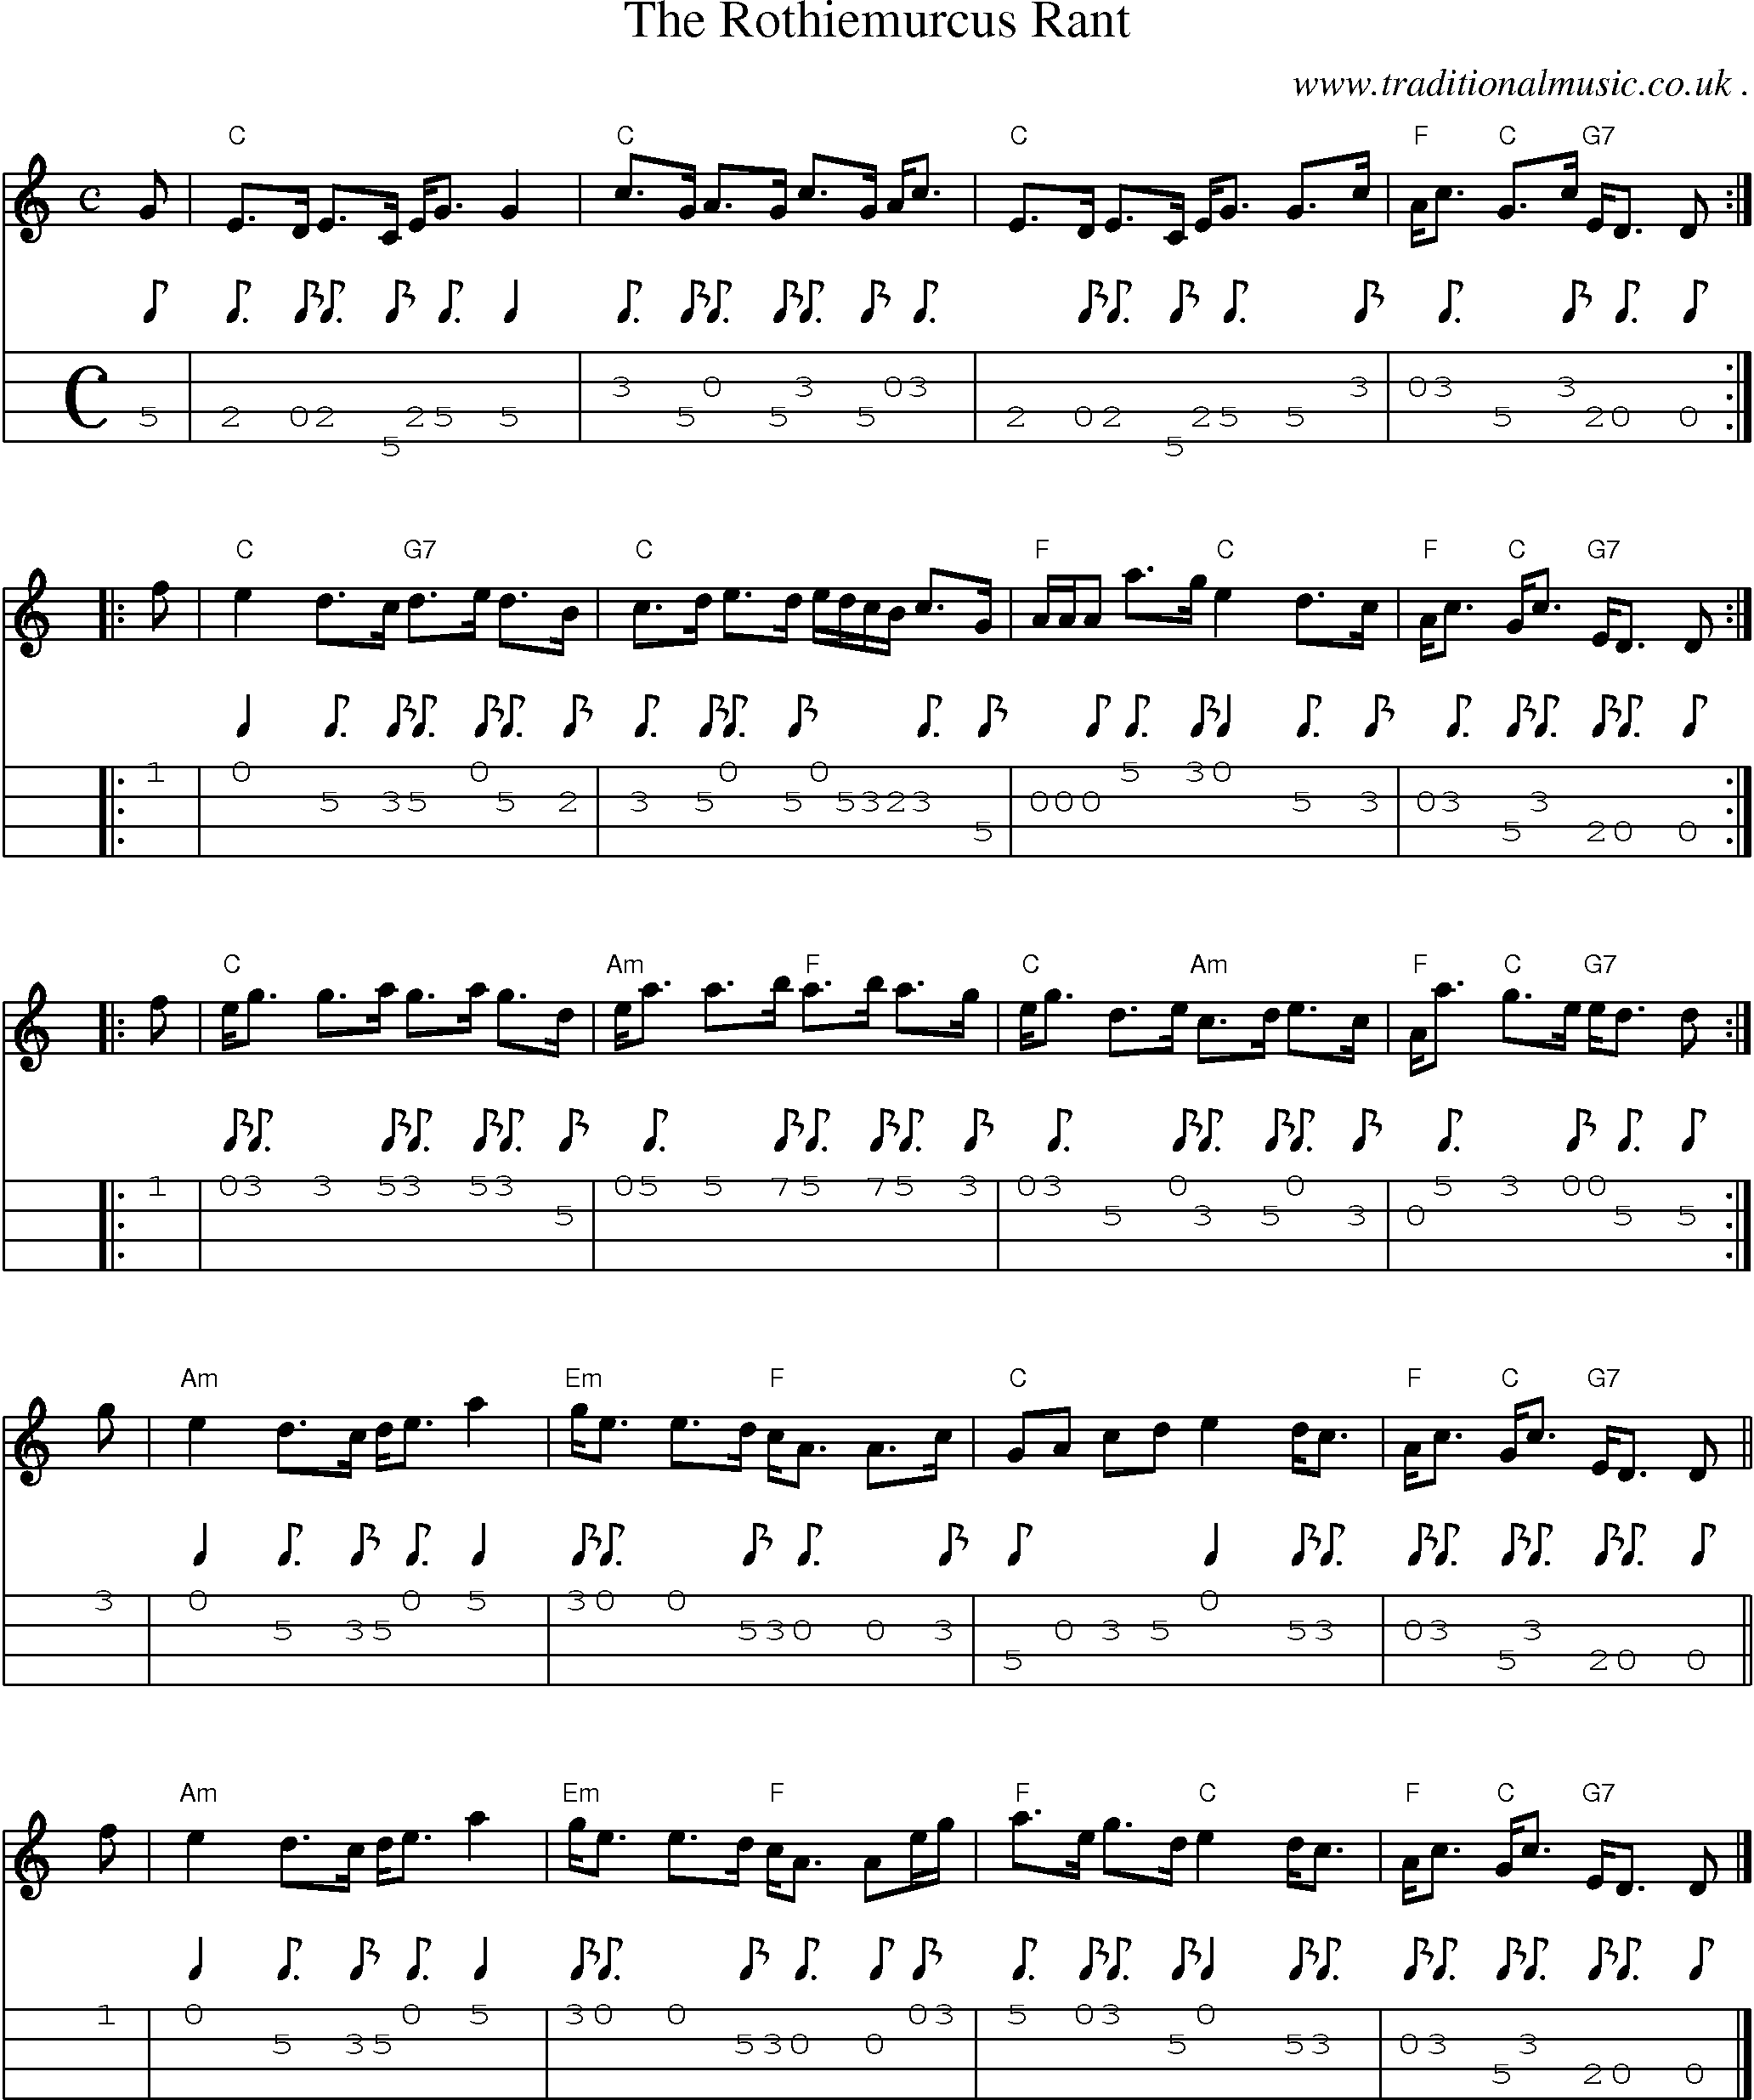 Sheet-music  score, Chords and Mandolin Tabs for The Rothiemurcus Rant